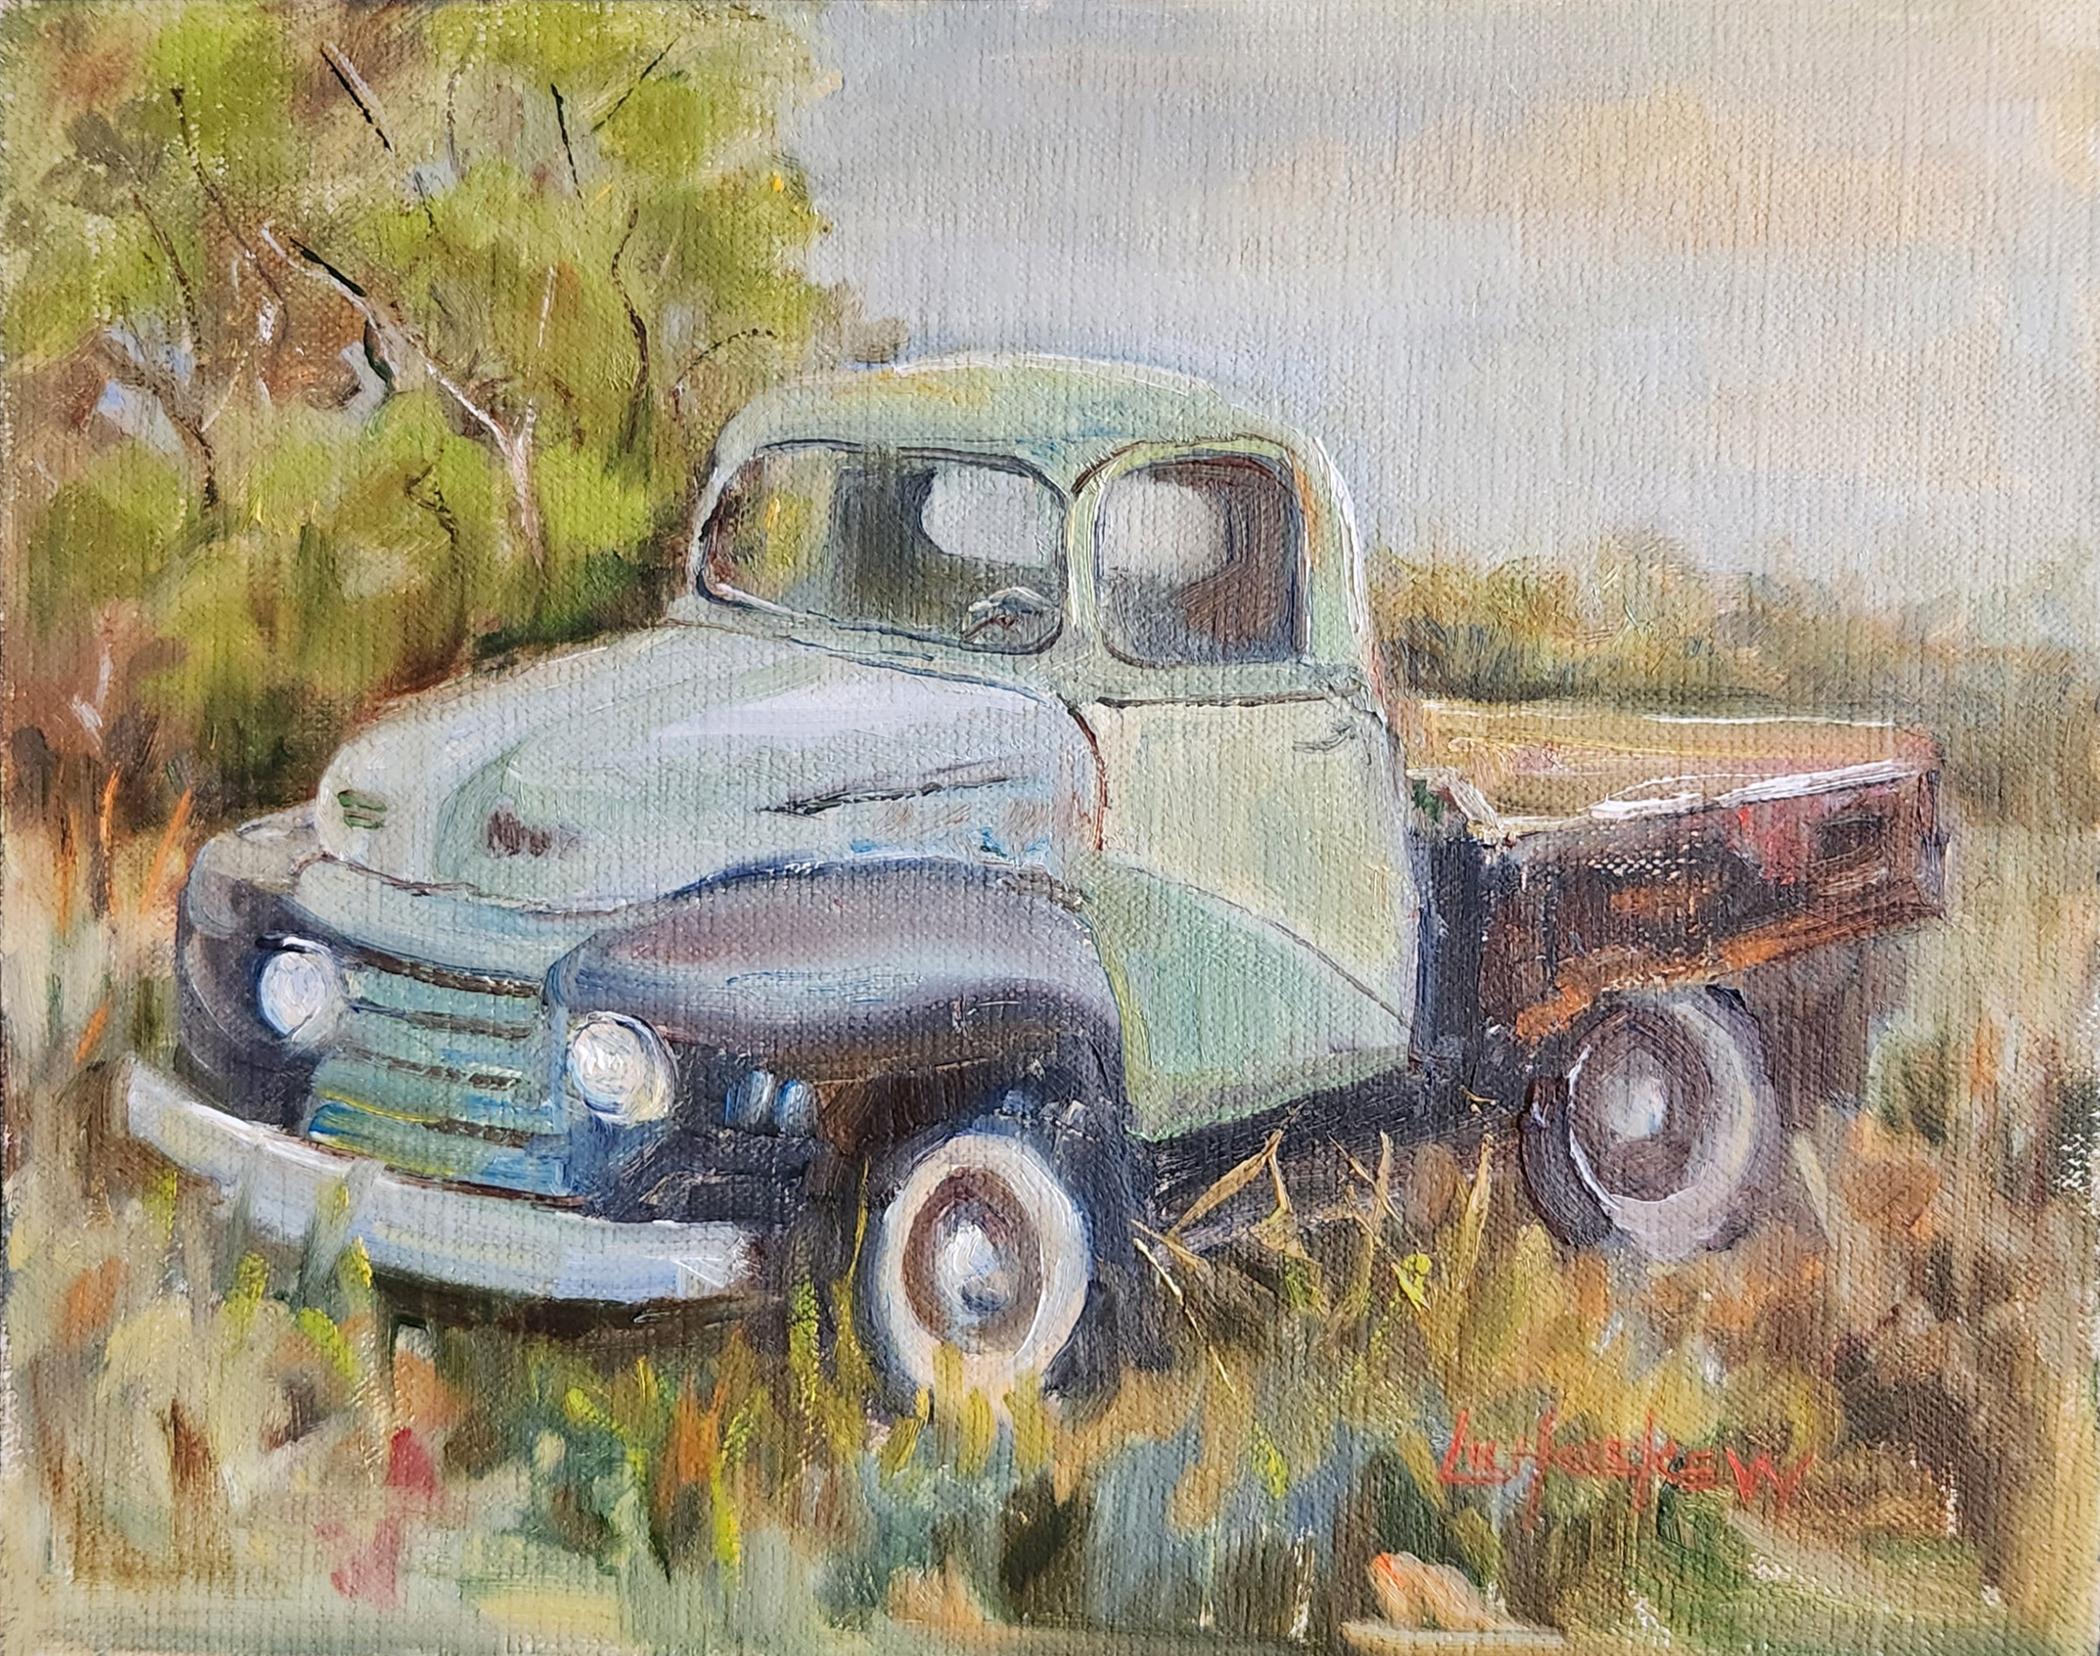 Classic Truck, 8x10" oil on board - Painting by Lu Haskew